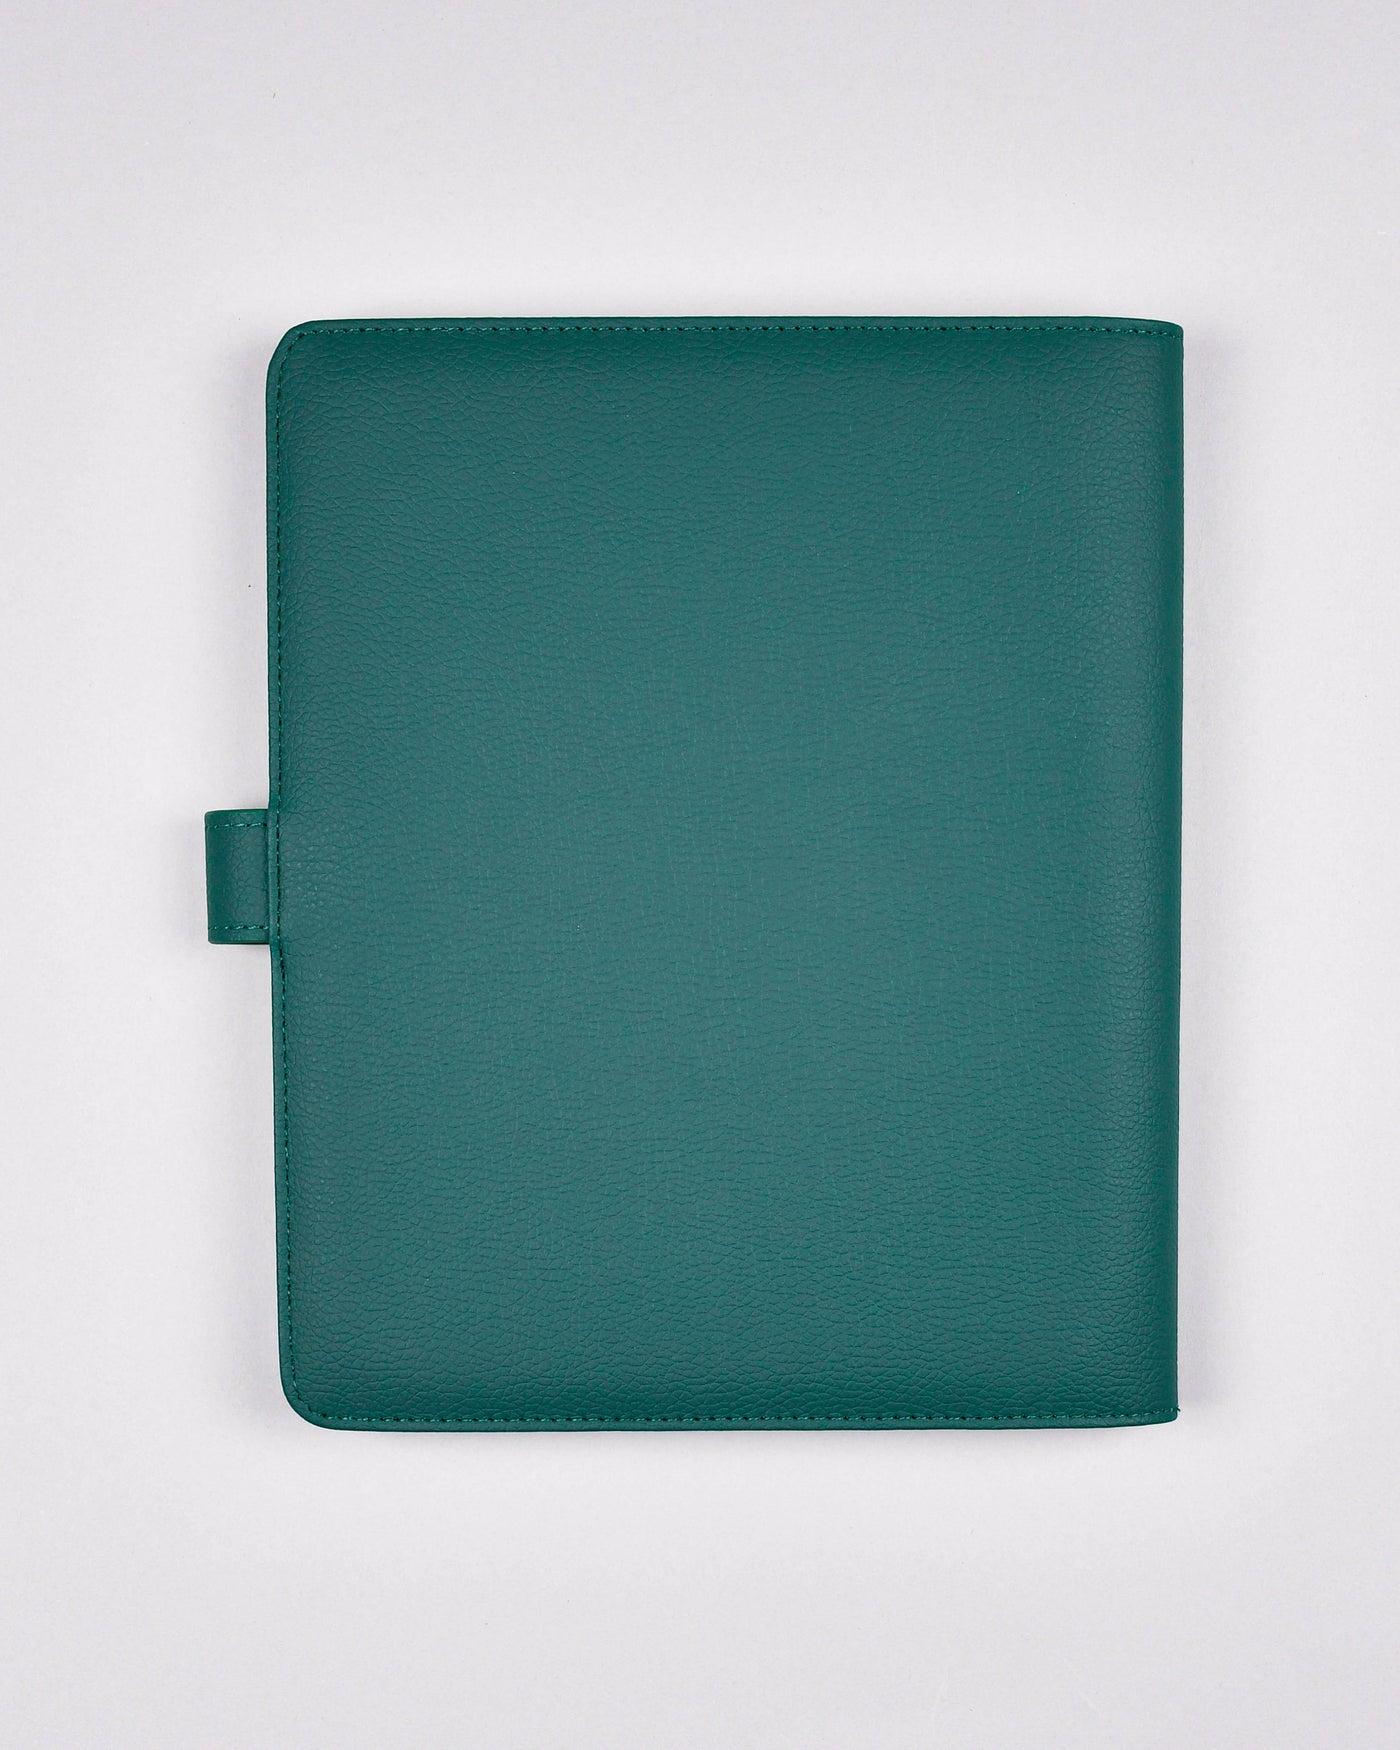 Deep Emerald Green Folio Planner Cover with Exterior Pocket